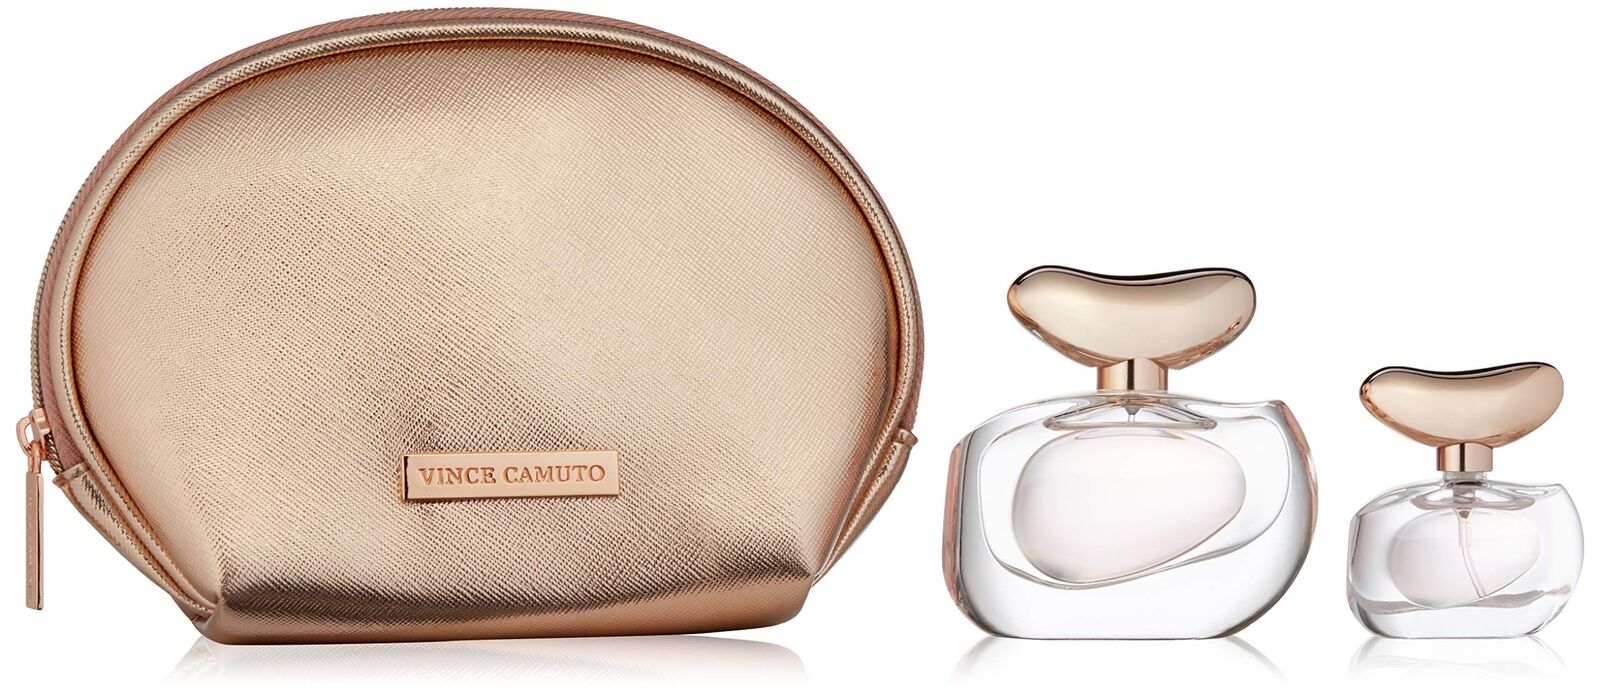 Vince Camuto Amore 3-Piece Perfume Gift Set for Women 